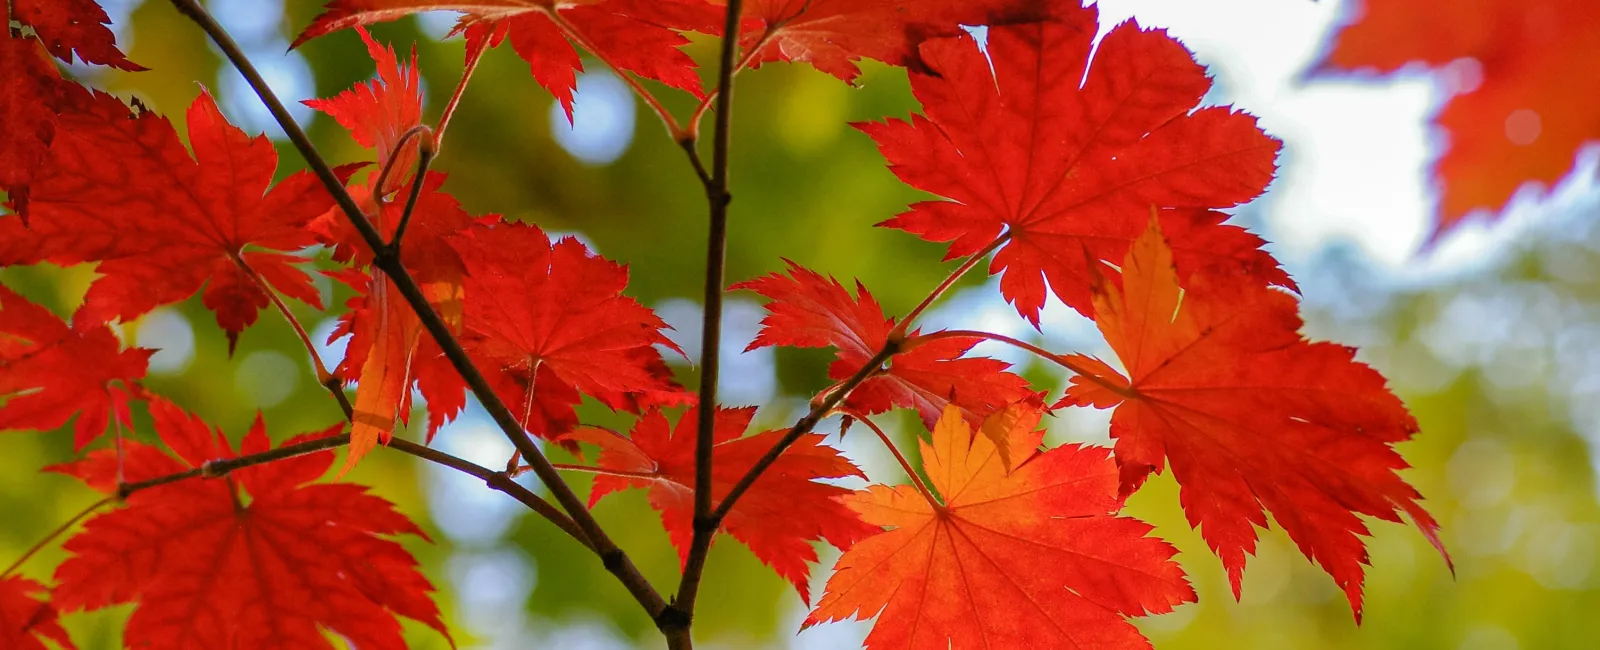 How To Care for a Red Maple